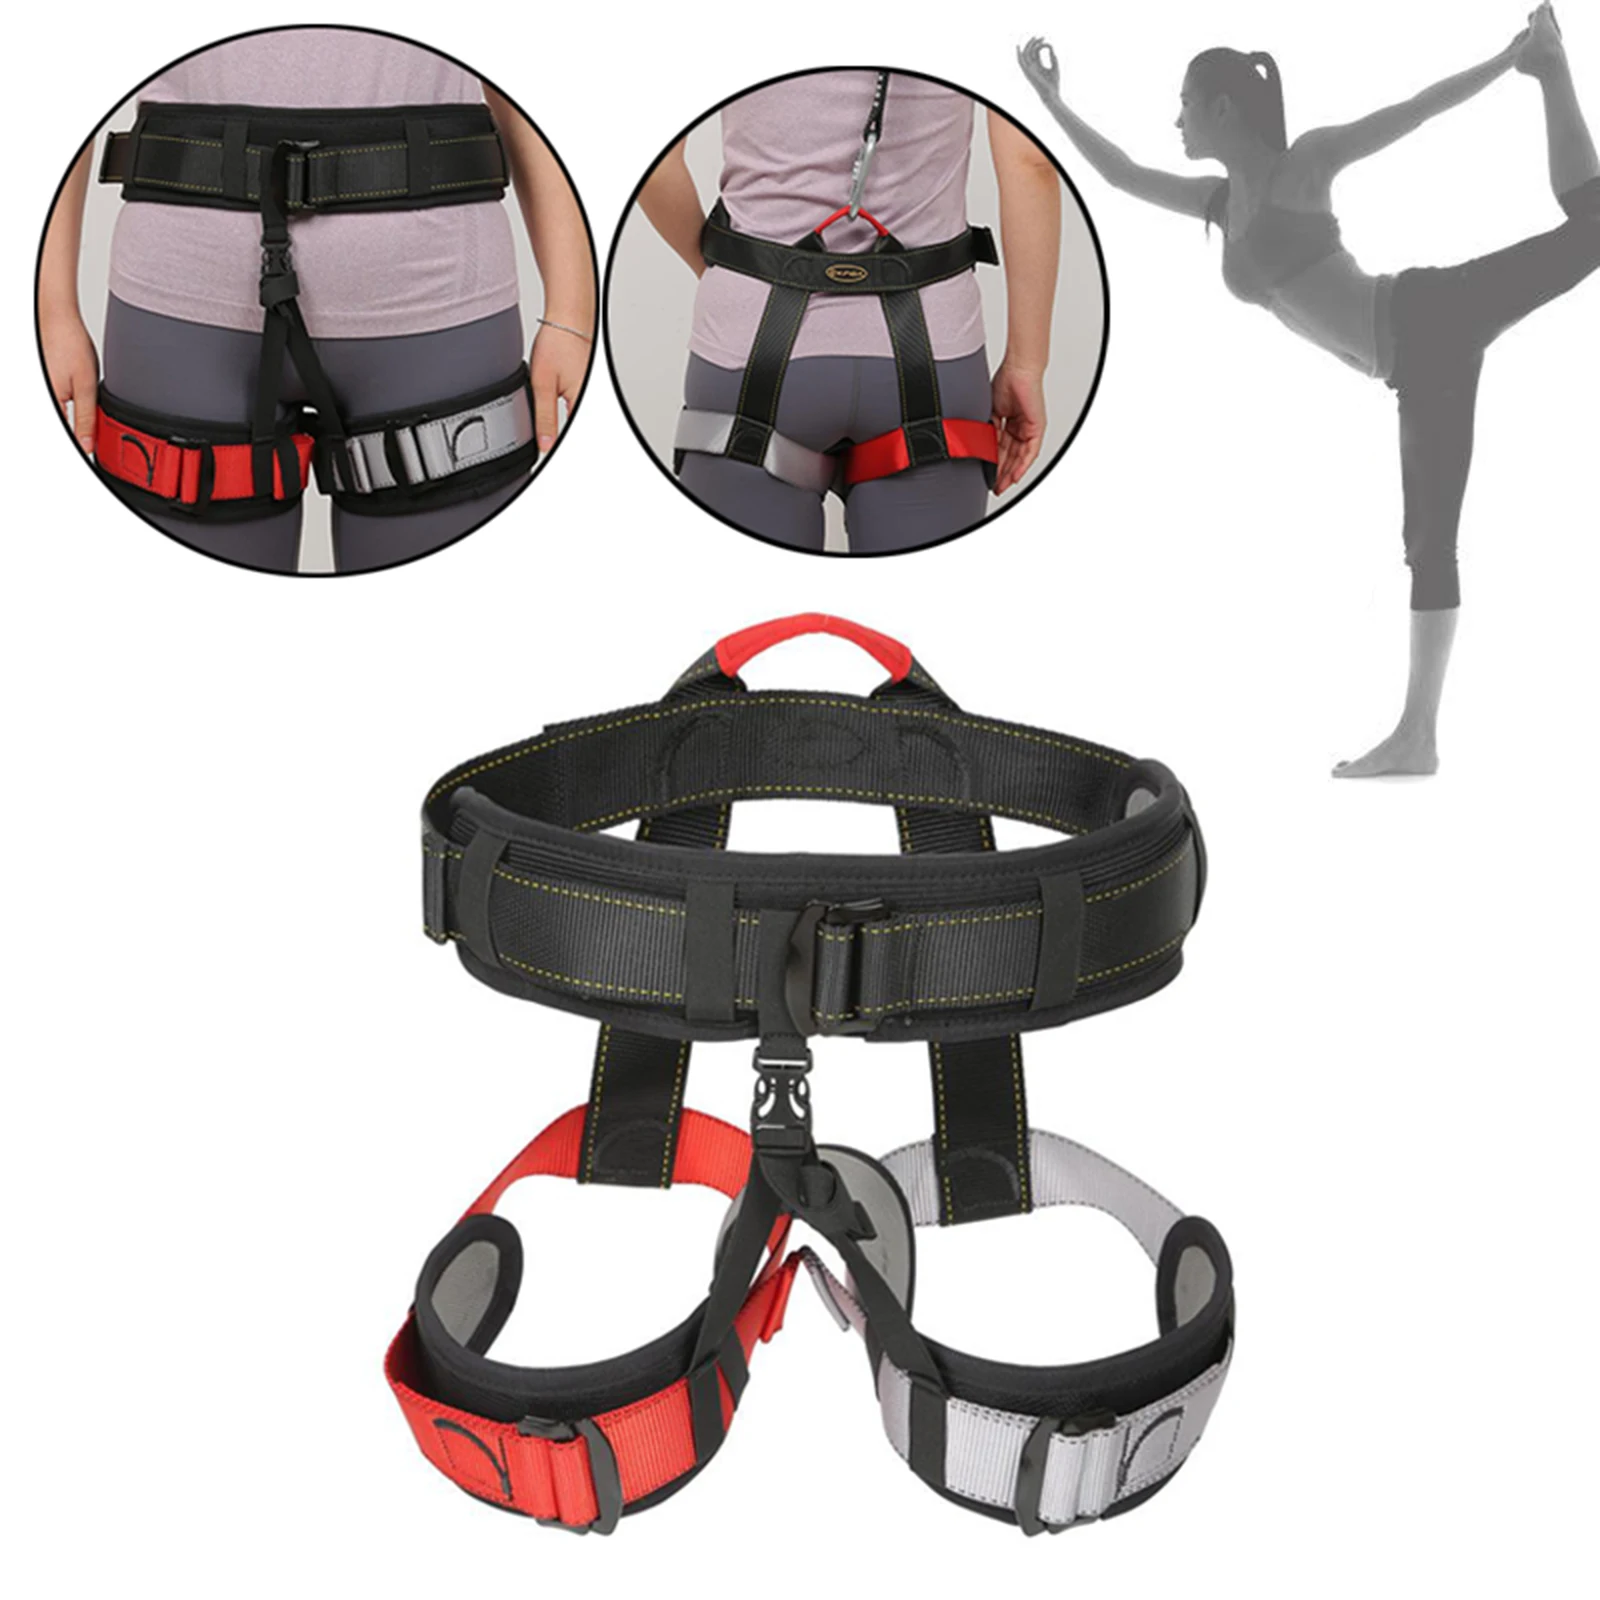 Half Body Climbing Harness Waist Safety Harnes Belts for Mountaineering Rock Climbing Rappelling Tree Climbing Strap